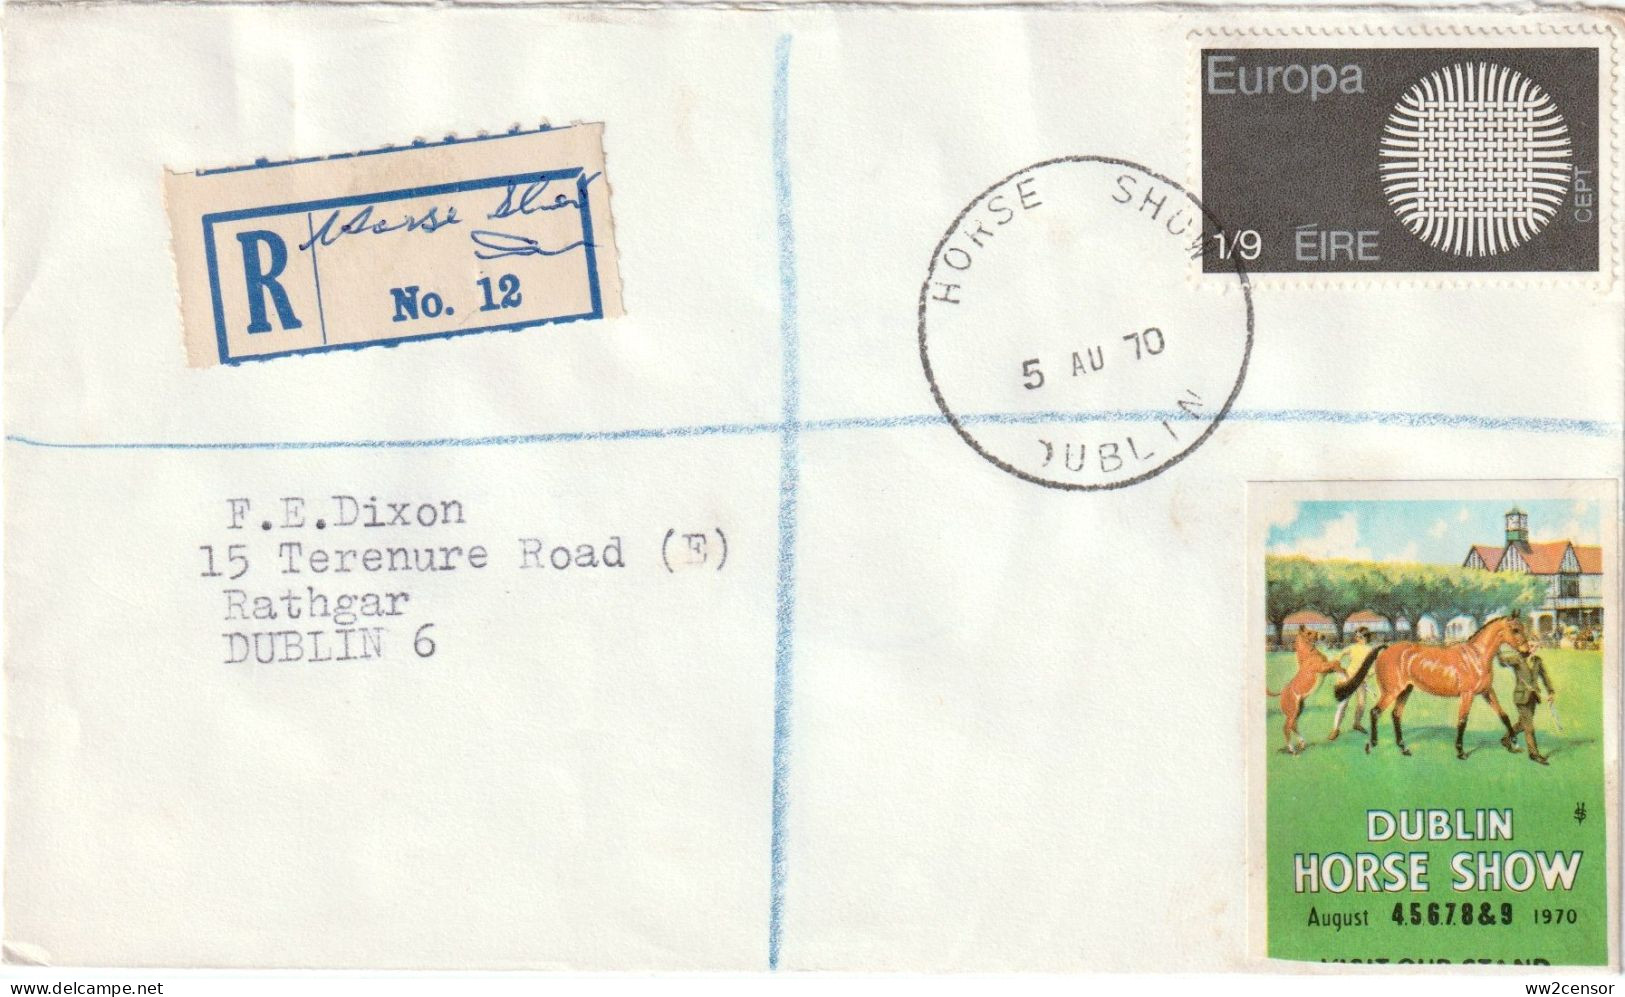 Ireland-Irlande-Irland: 5 RDS Horse Show special registered letters 1962-70